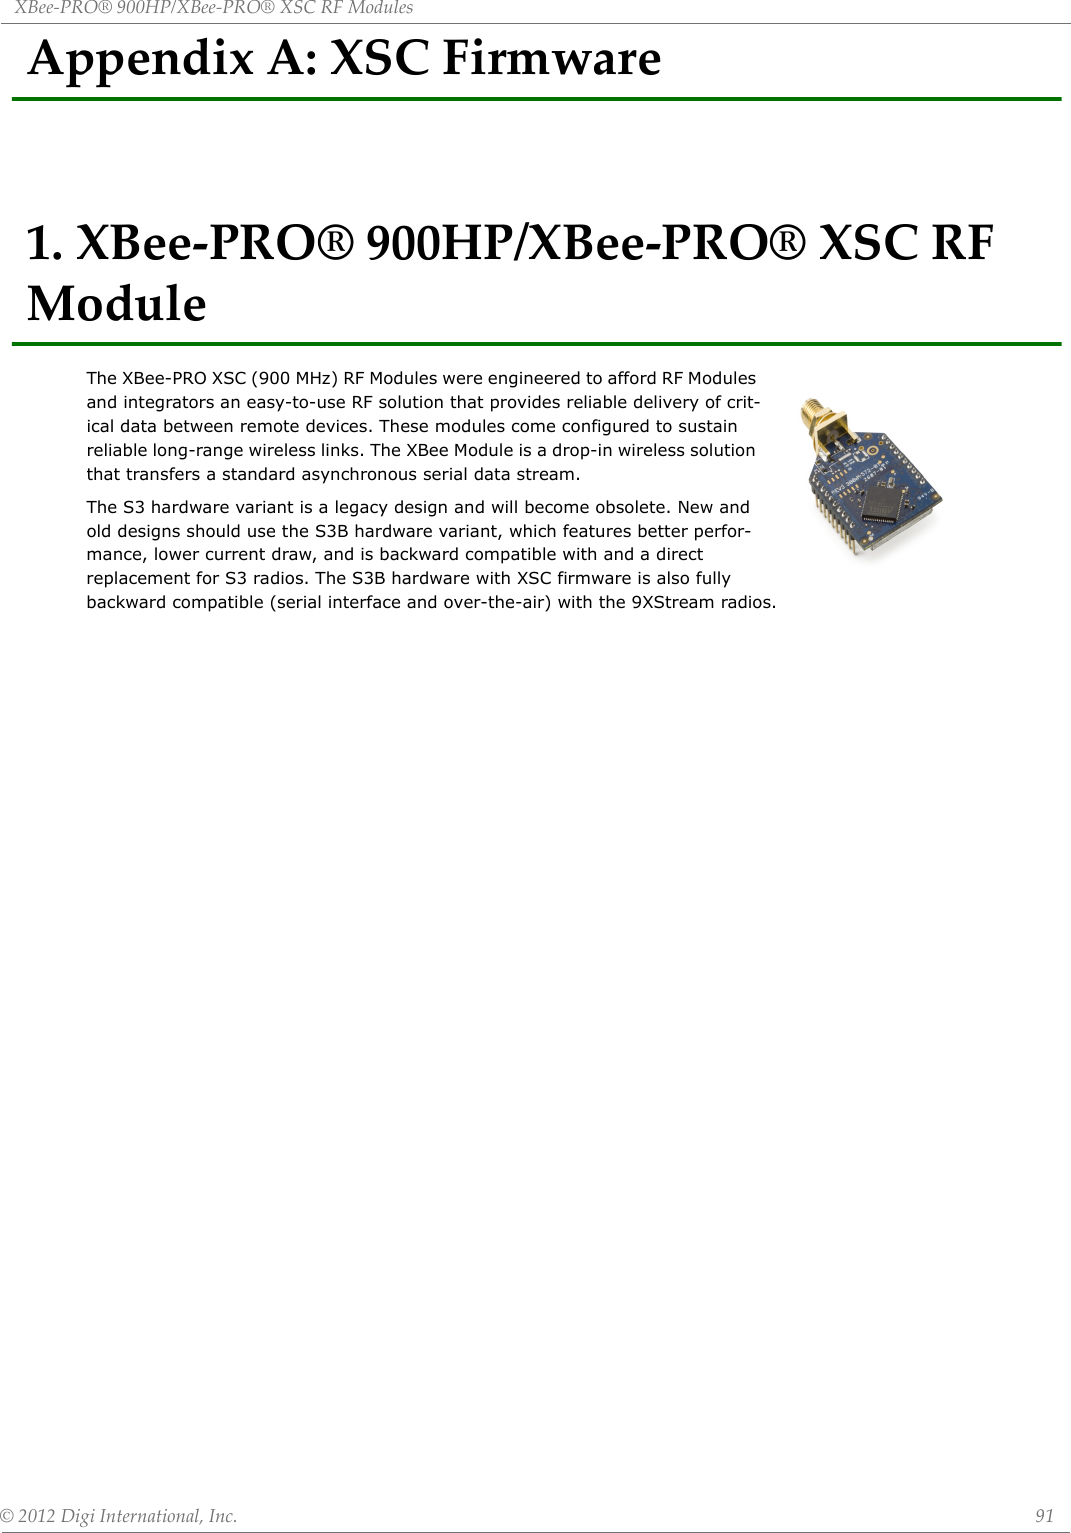 XBee‐PRO®900HP/XBee‐PRO®XSCRFModules©2012DigiInternational,Inc. 91AppendixA:XSCFirmware1.XBee‐PRO®900HP/XBee‐PRO®XSCRFModuleThe XBee-PRO XSC (900 MHz) RF Modules were engineered to afford RF Modules and integrators an easy-to-use RF solution that provides reliable delivery of crit-ical data between remote devices. These modules come configured to sustain reliable long-range wireless links. The XBee Module is a drop-in wireless solution that transfers a standard asynchronous serial data stream.The S3 hardware variant is a legacy design and will become obsolete. New and old designs should use the S3B hardware variant, which features better perfor-mance, lower current draw, and is backward compatible with and a direct replacement for S3 radios. The S3B hardware with XSC firmware is also fully backward compatible (serial interface and over-the-air) with the 9XStream radios.